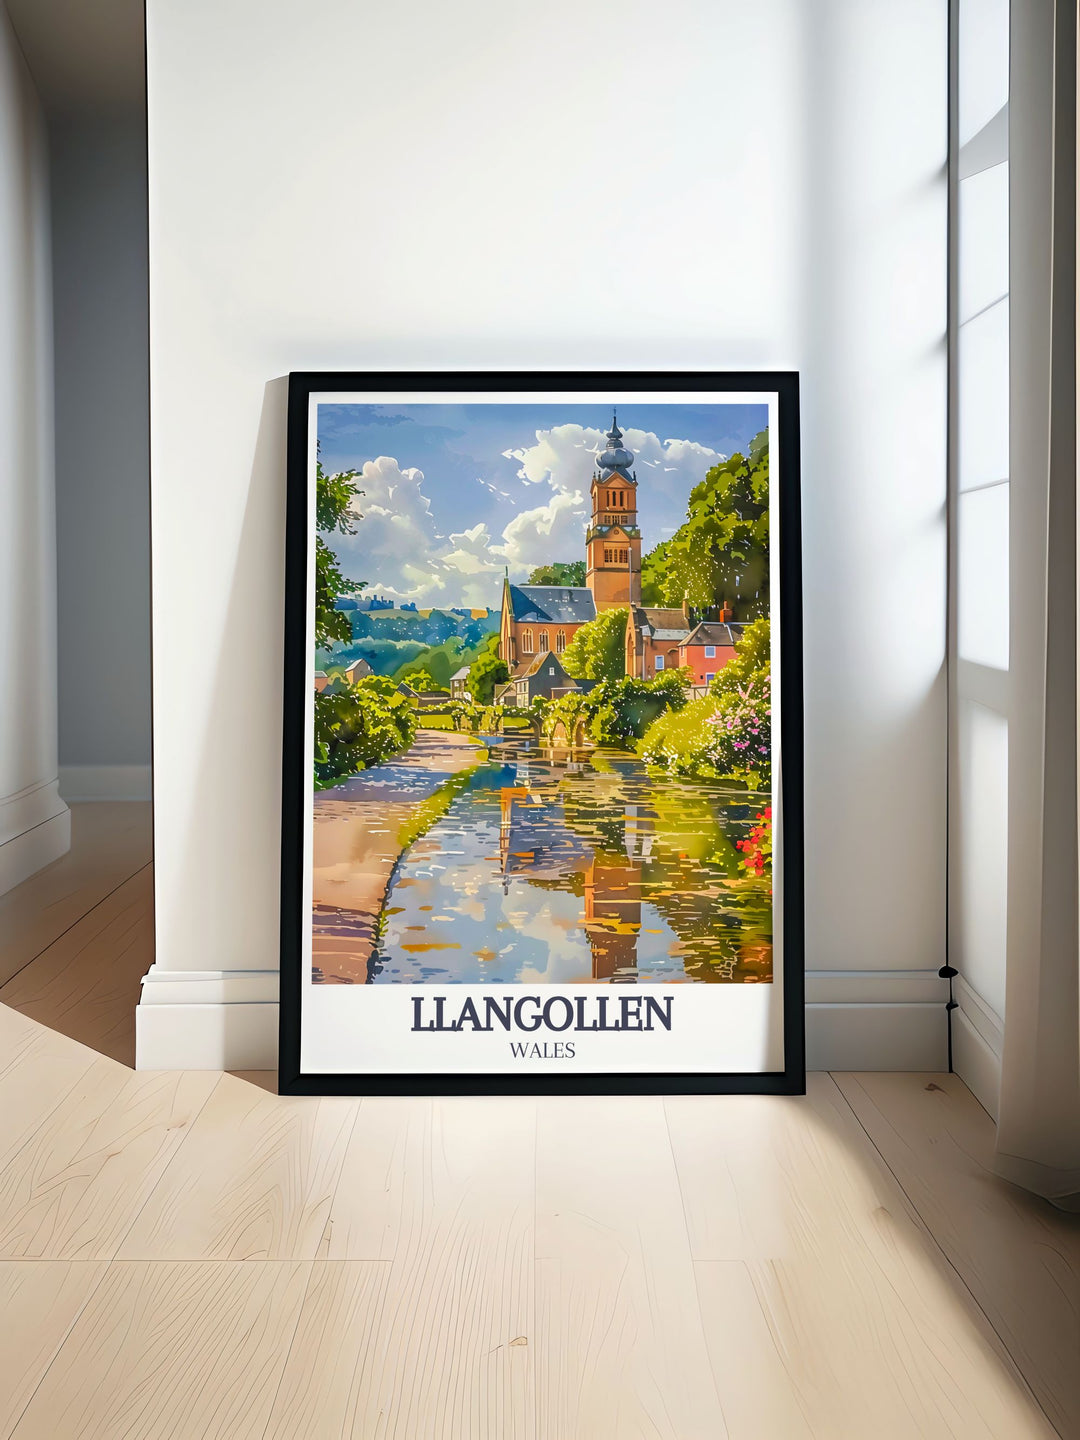 River Dee Llangollen Canal and Llangollen Methodist Church featured in a stunning wall art print perfect for adding a touch of Welsh beauty to your home decor. This poster highlights the serene landscapes and iconic architecture of Llangollen with vibrant colors and intricate details.